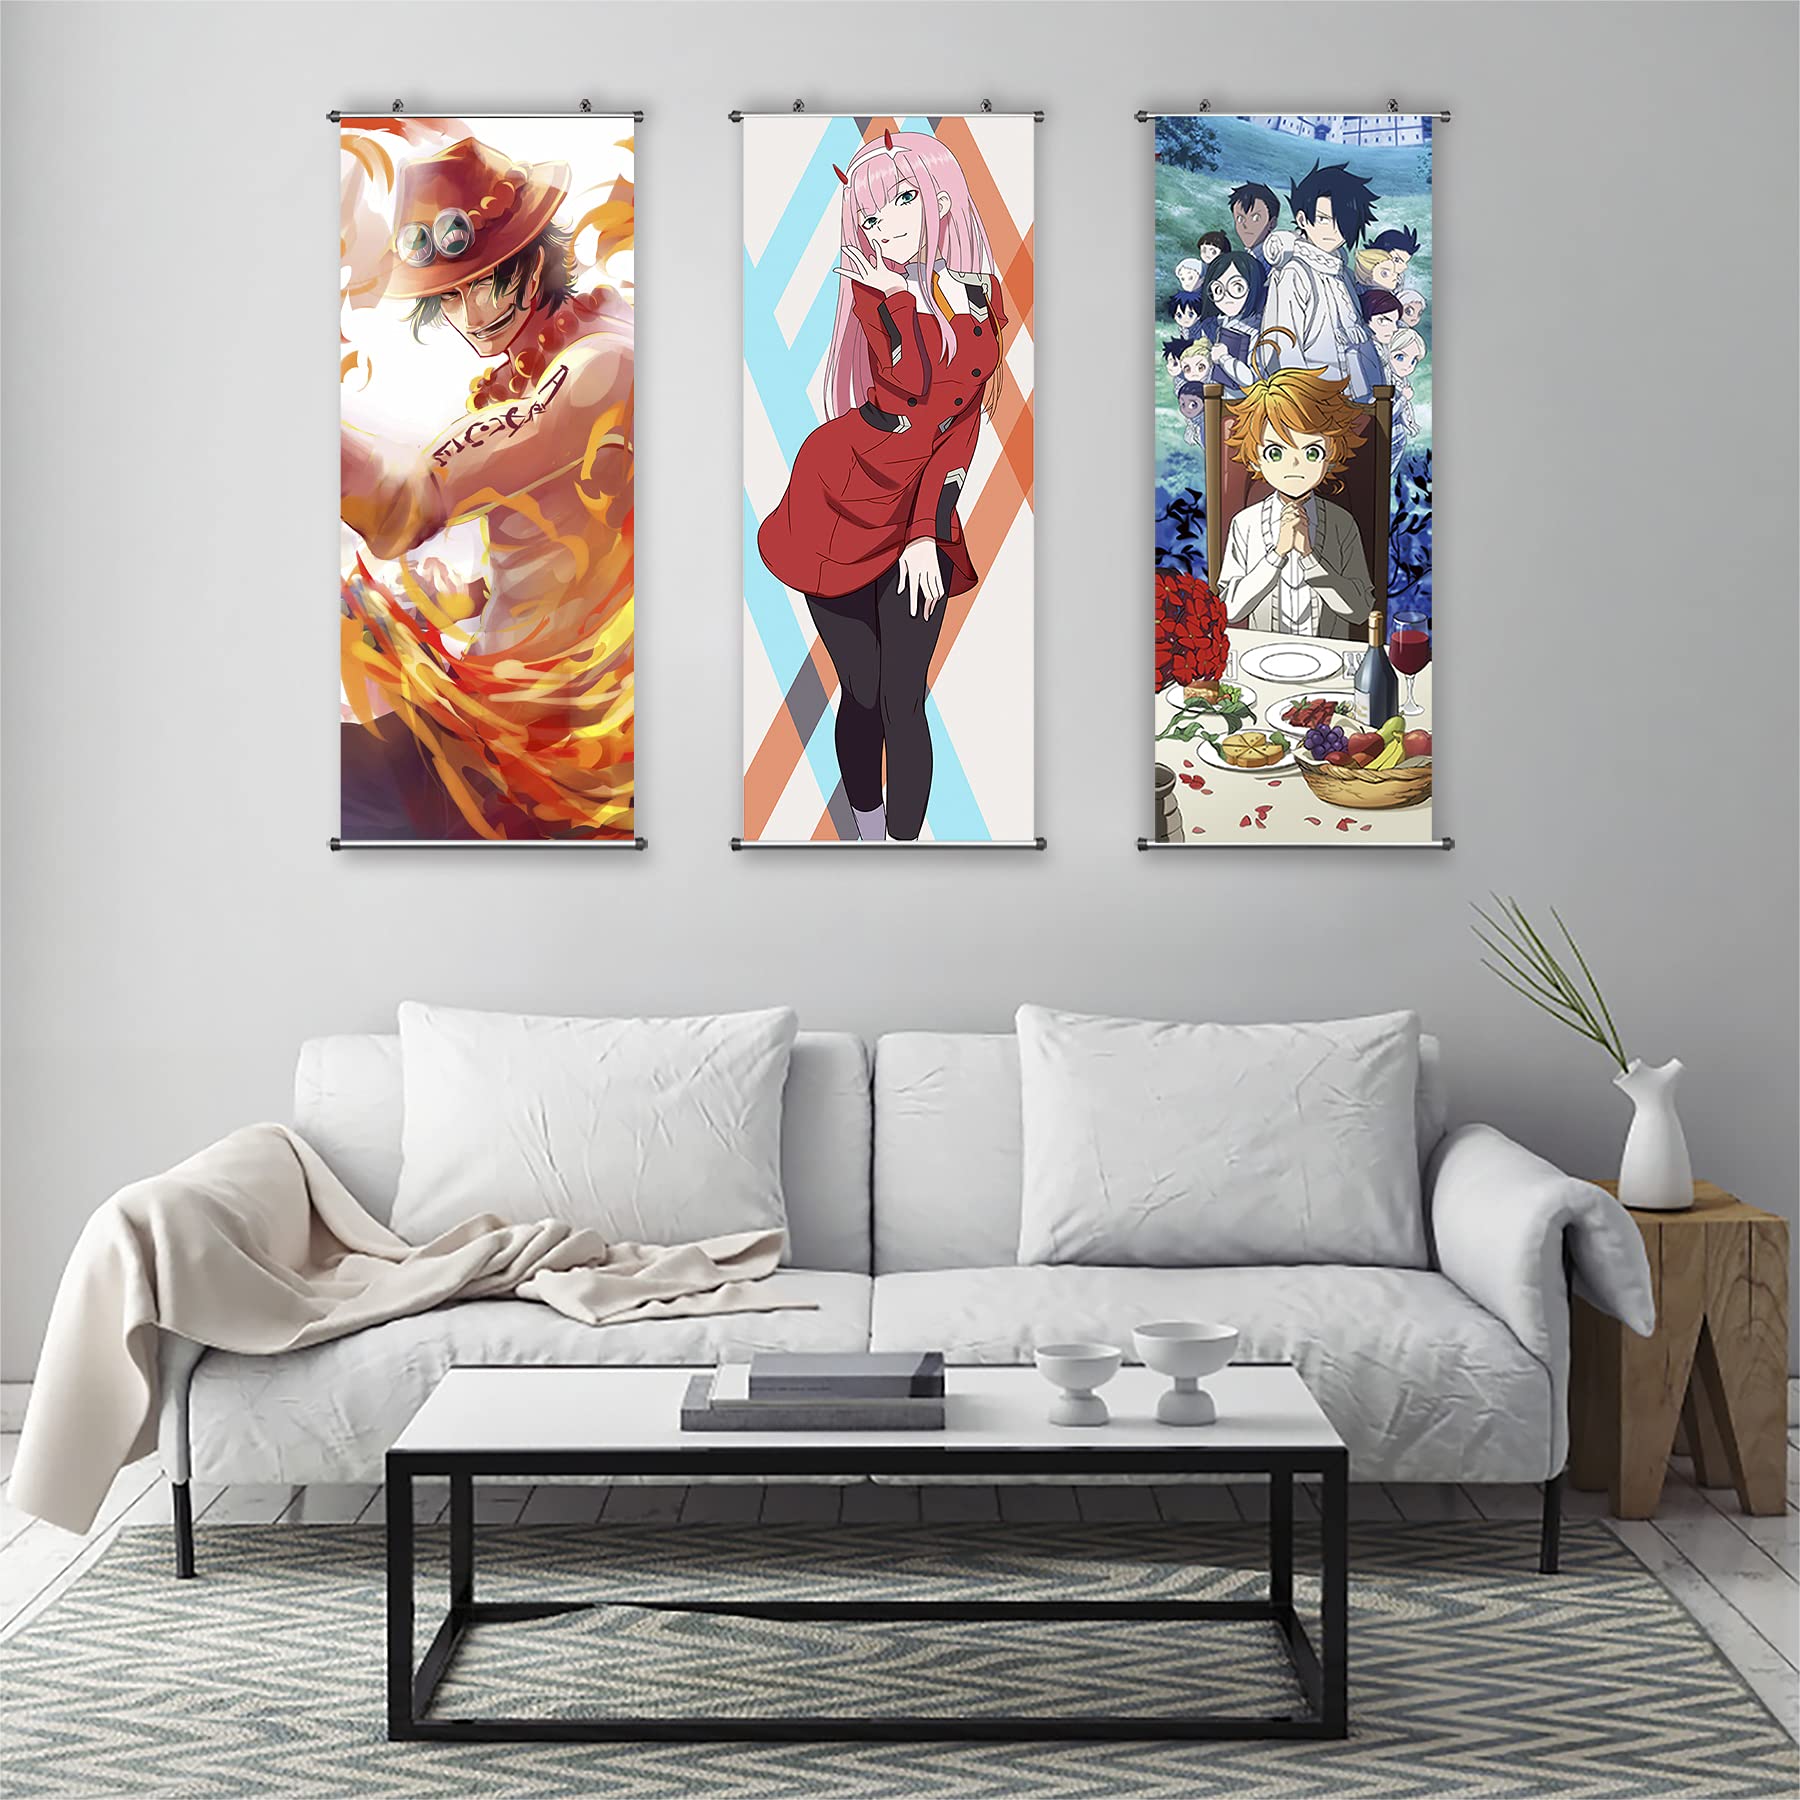 vfaejll Anime Wall Collage Kit Aesthetic Pictures, | Ubuy Indonesia